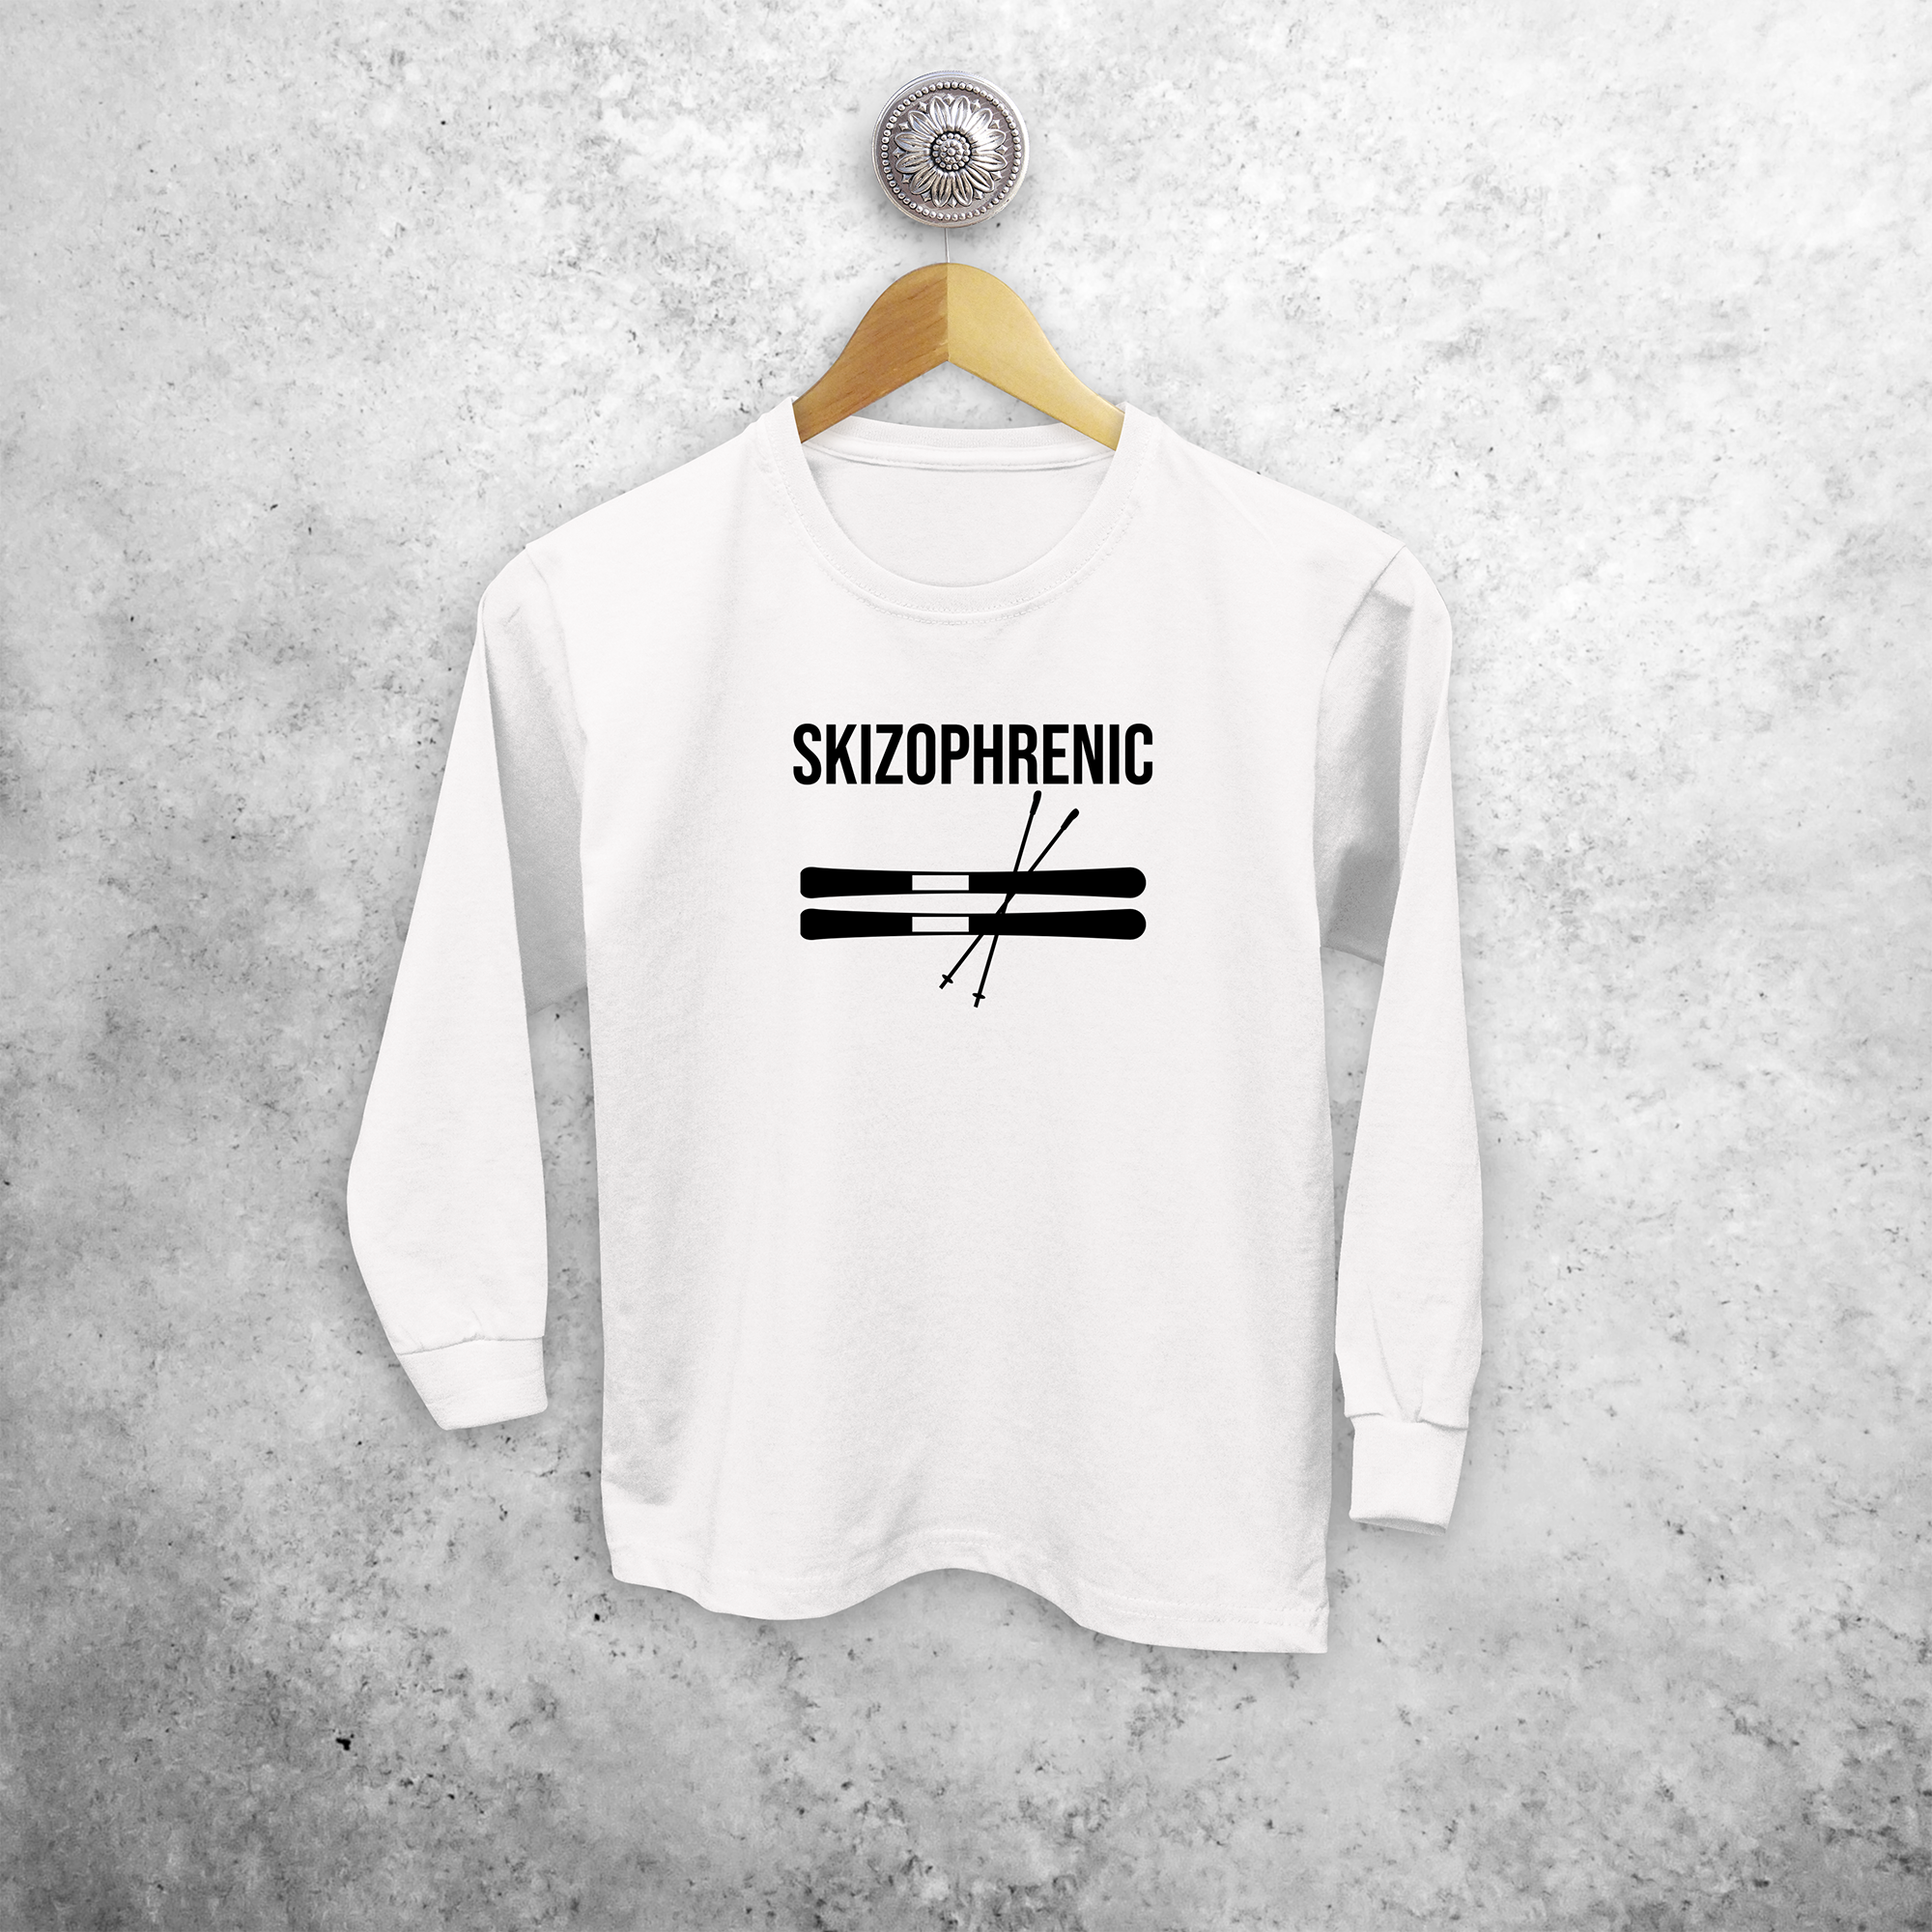 Kids shirt with long sleeves, with ‘Skizophrenic’ print by KMLeon.